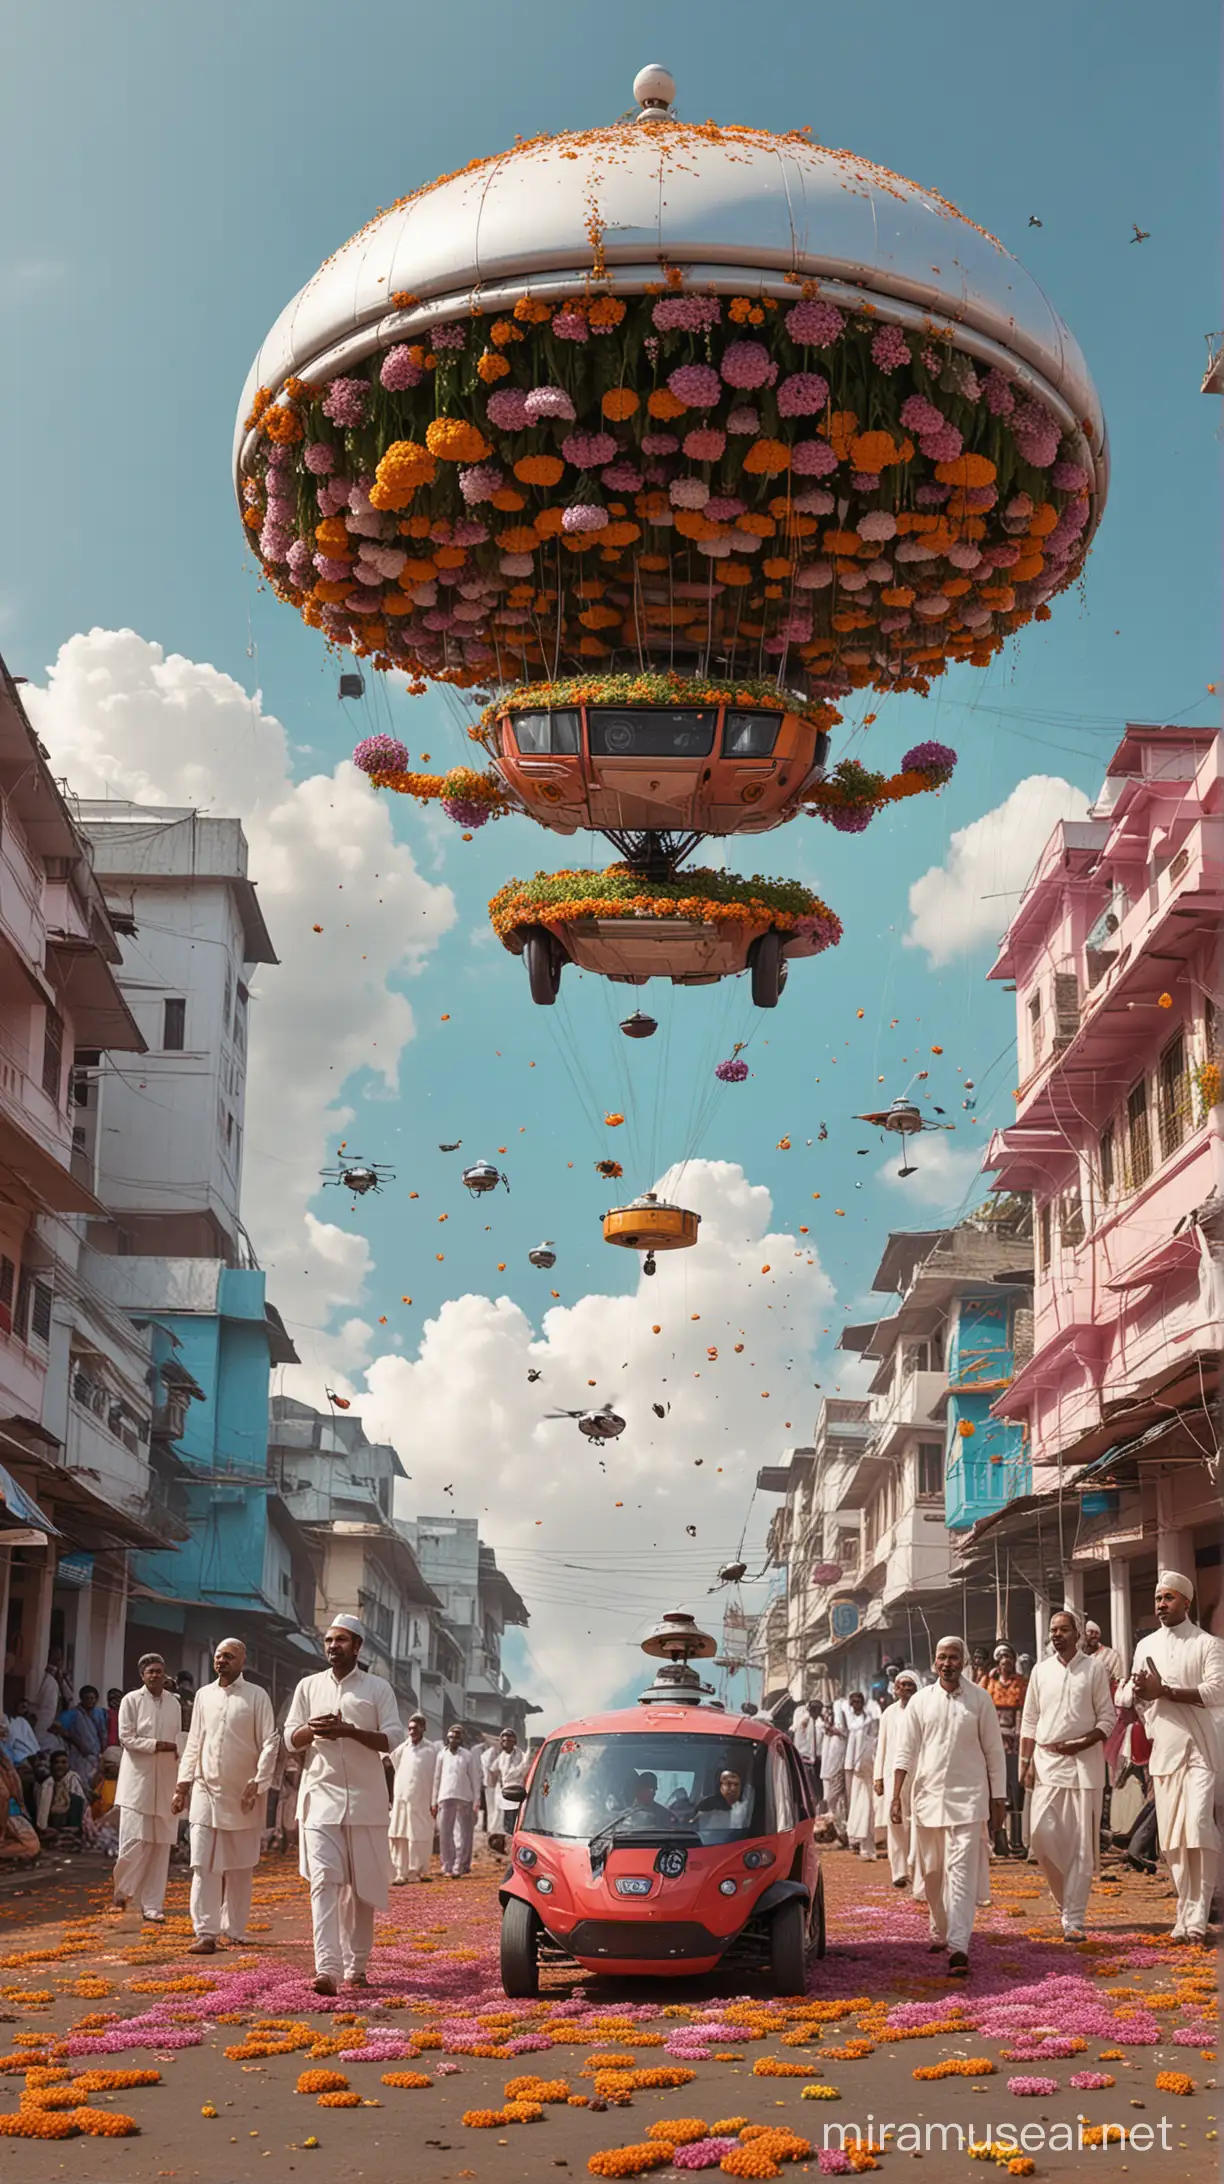 an illustration of a futuristic food pod  on thr ground not flying with kerala building behind and autorikshaw drivers and autos infront with drones delivering food on the ground and hindu priests throwing flowers on the ground to the devotees from the sky in an hoverboard and holograms in the sky in low angle ant view  dynamic 3 point perspectuve low angle